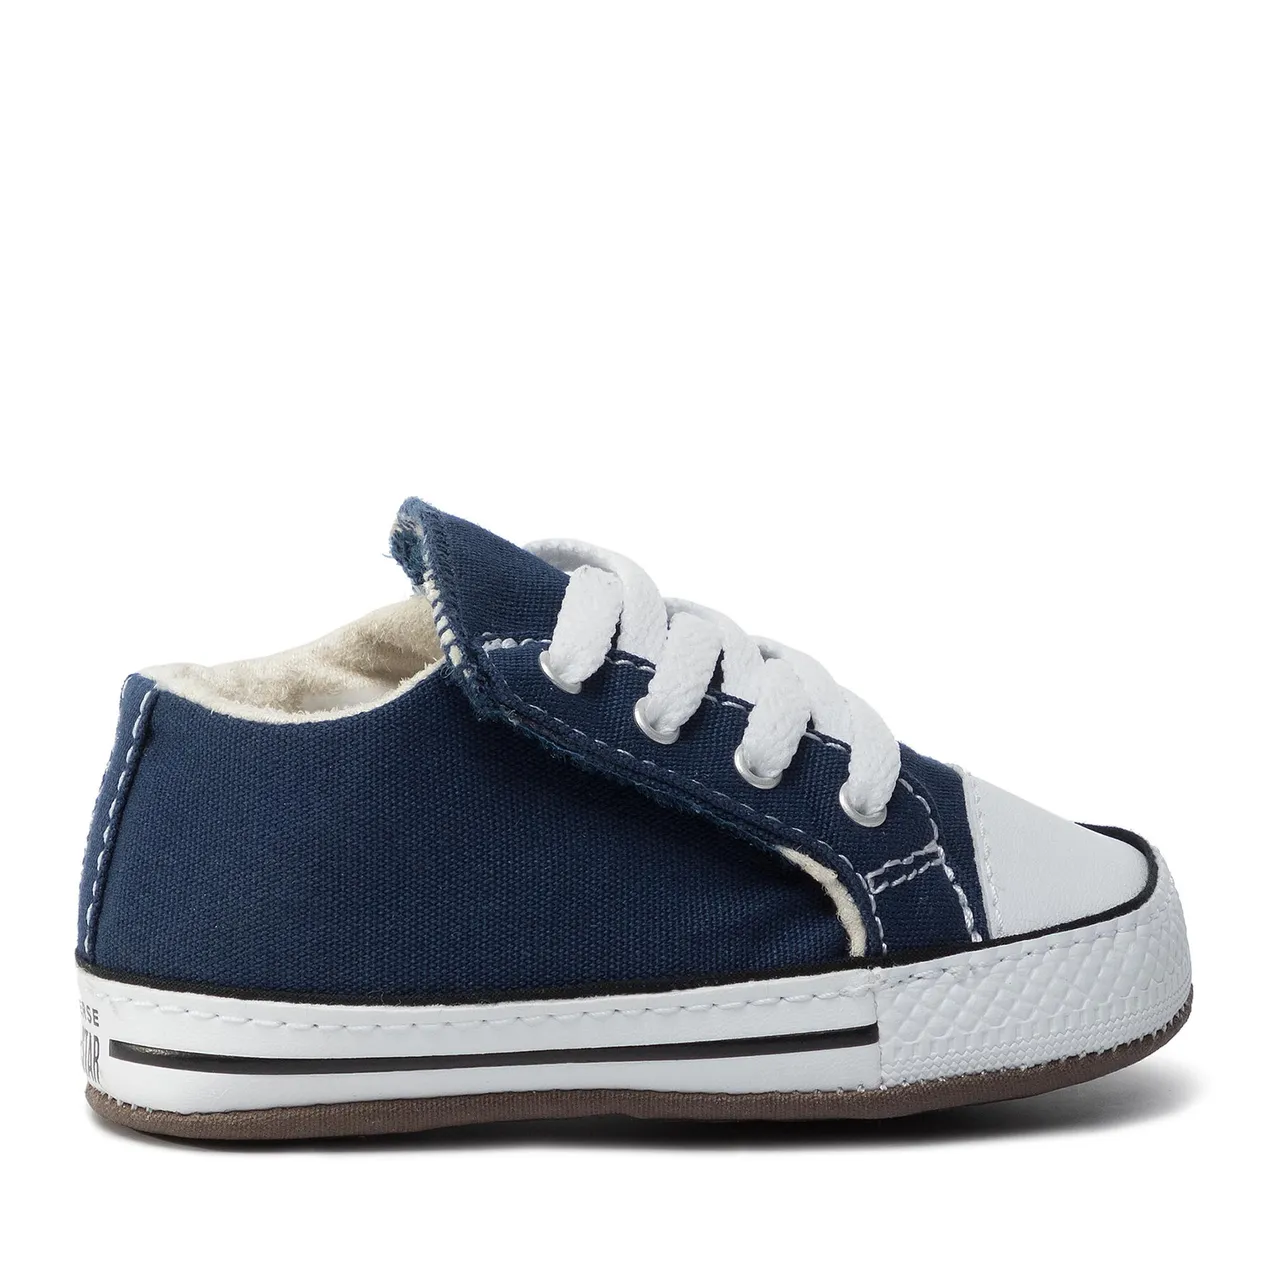 Sneakers aus Stoff Converse Ctas Cribster Mid 865158C Navy/Natural Ivory/White